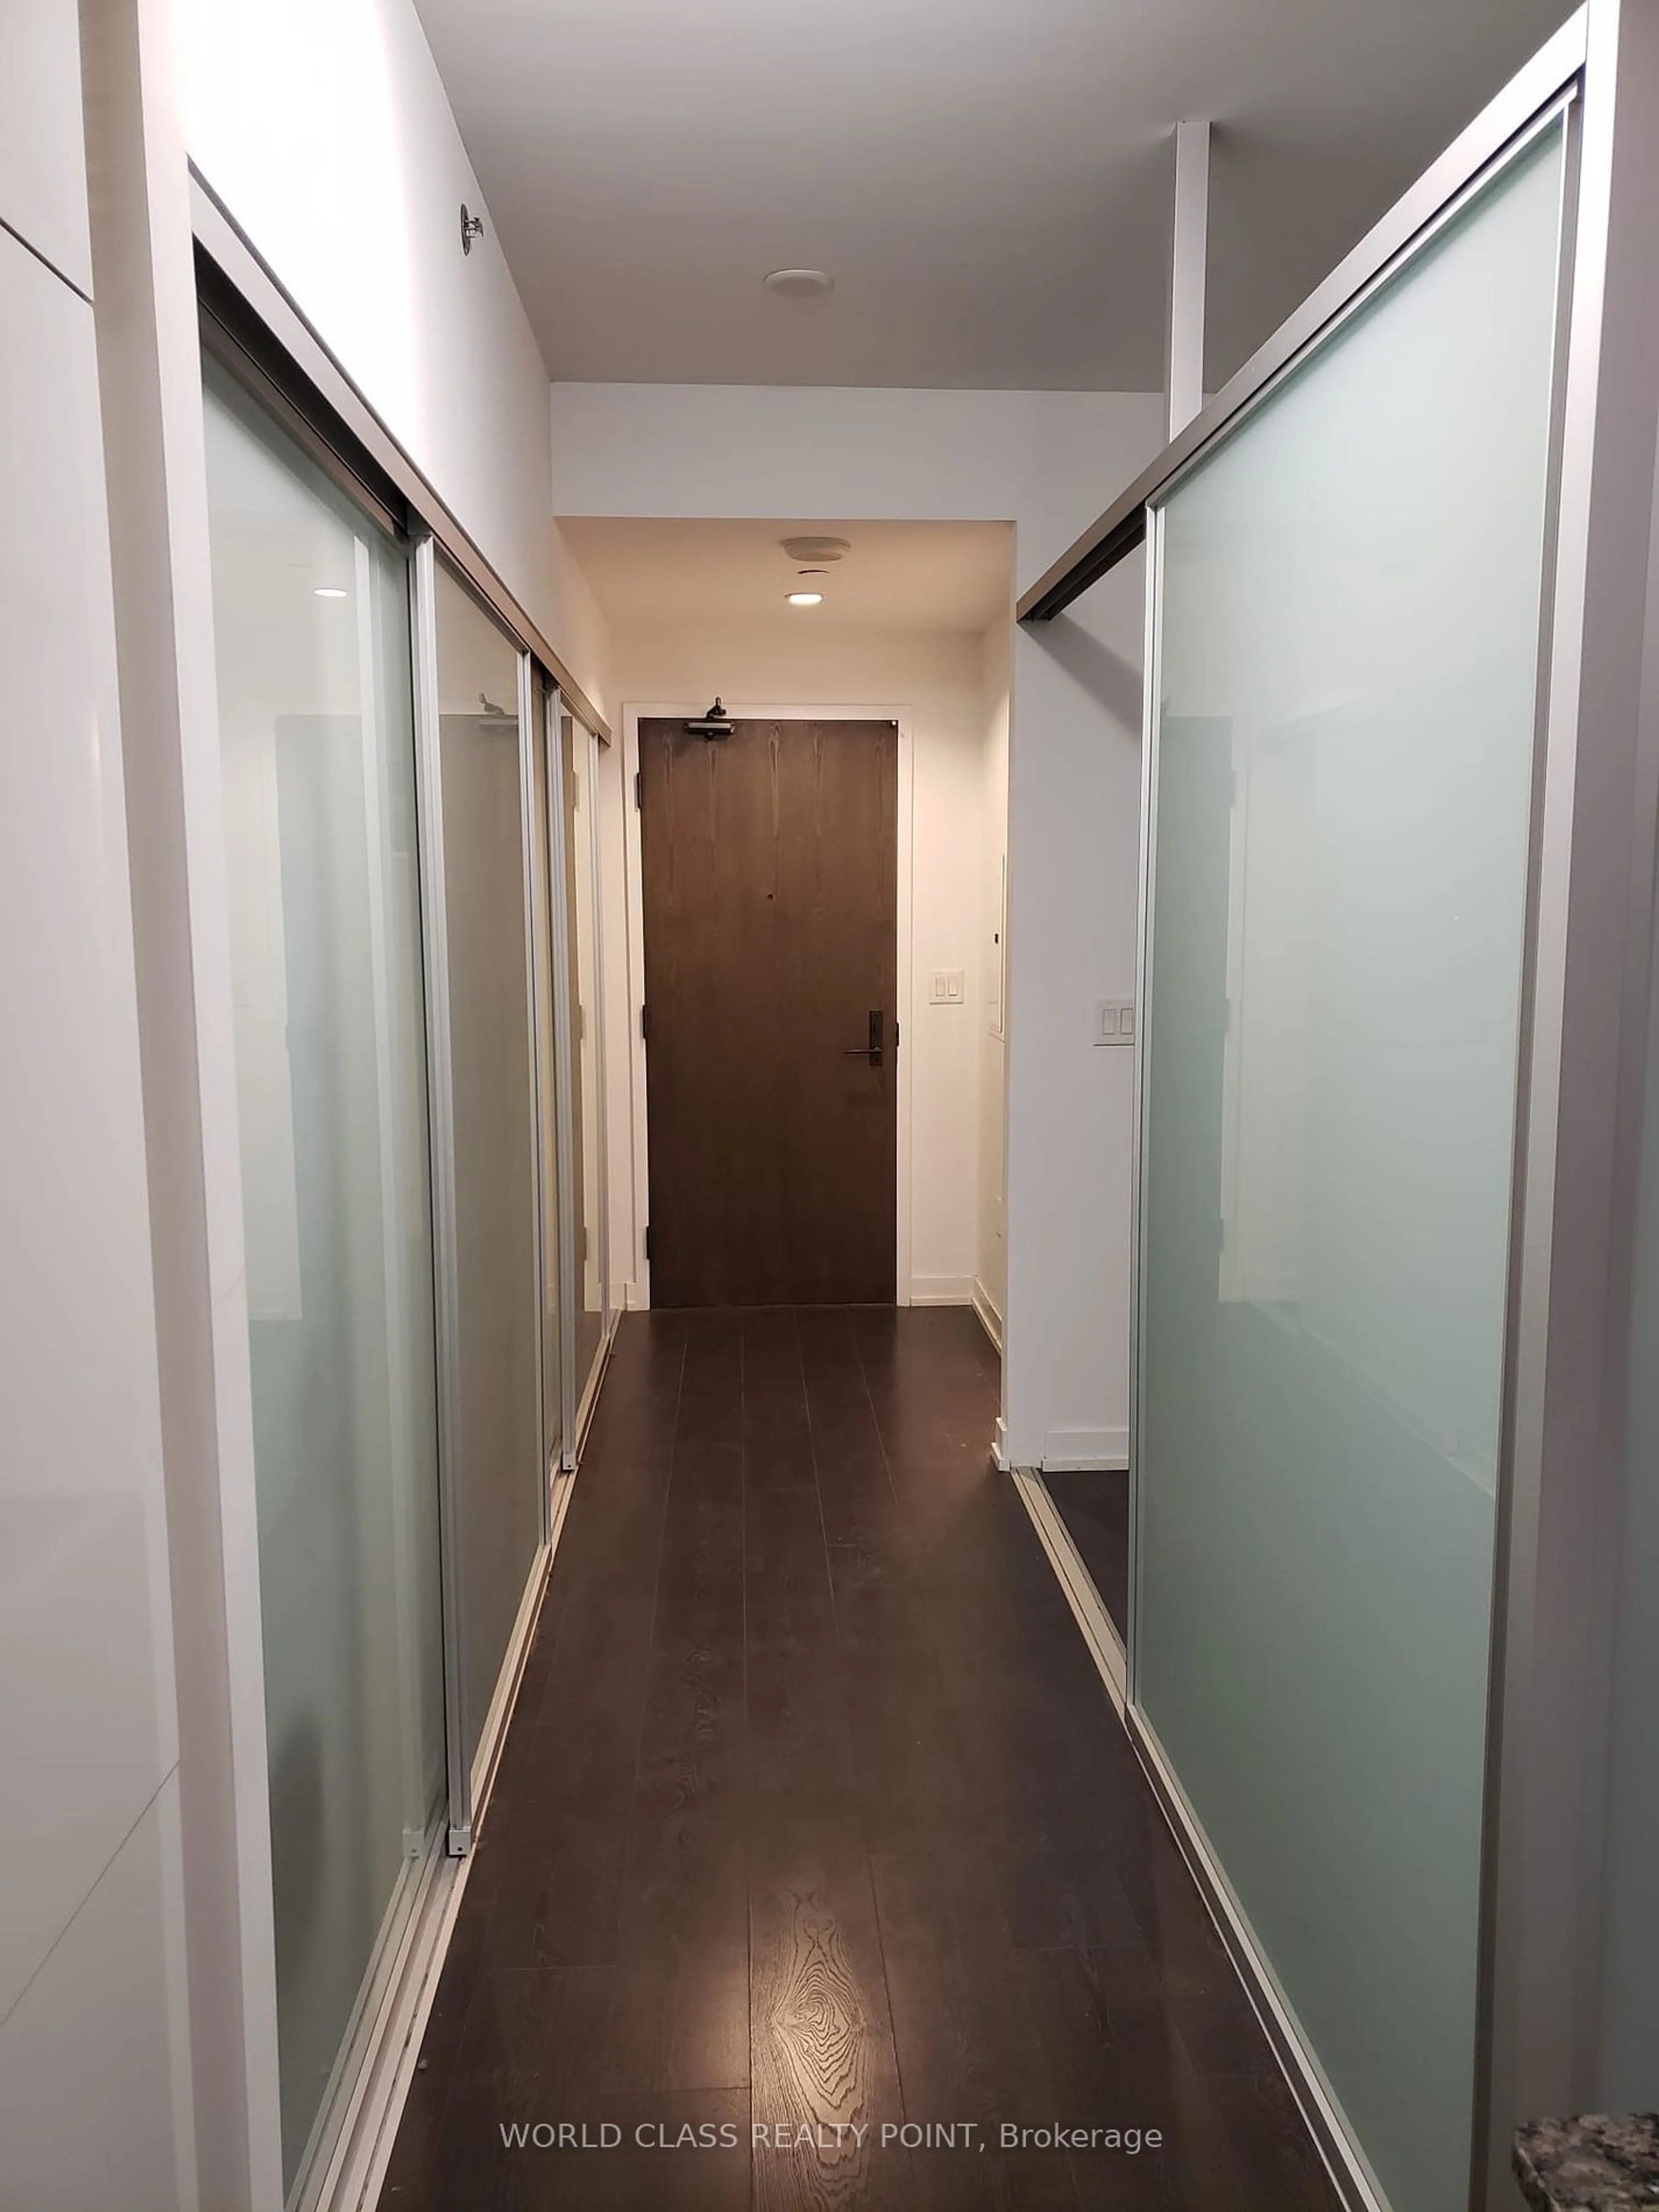 Other indoor space for 426 University Ave #1506, Toronto Ontario M5G 1S9